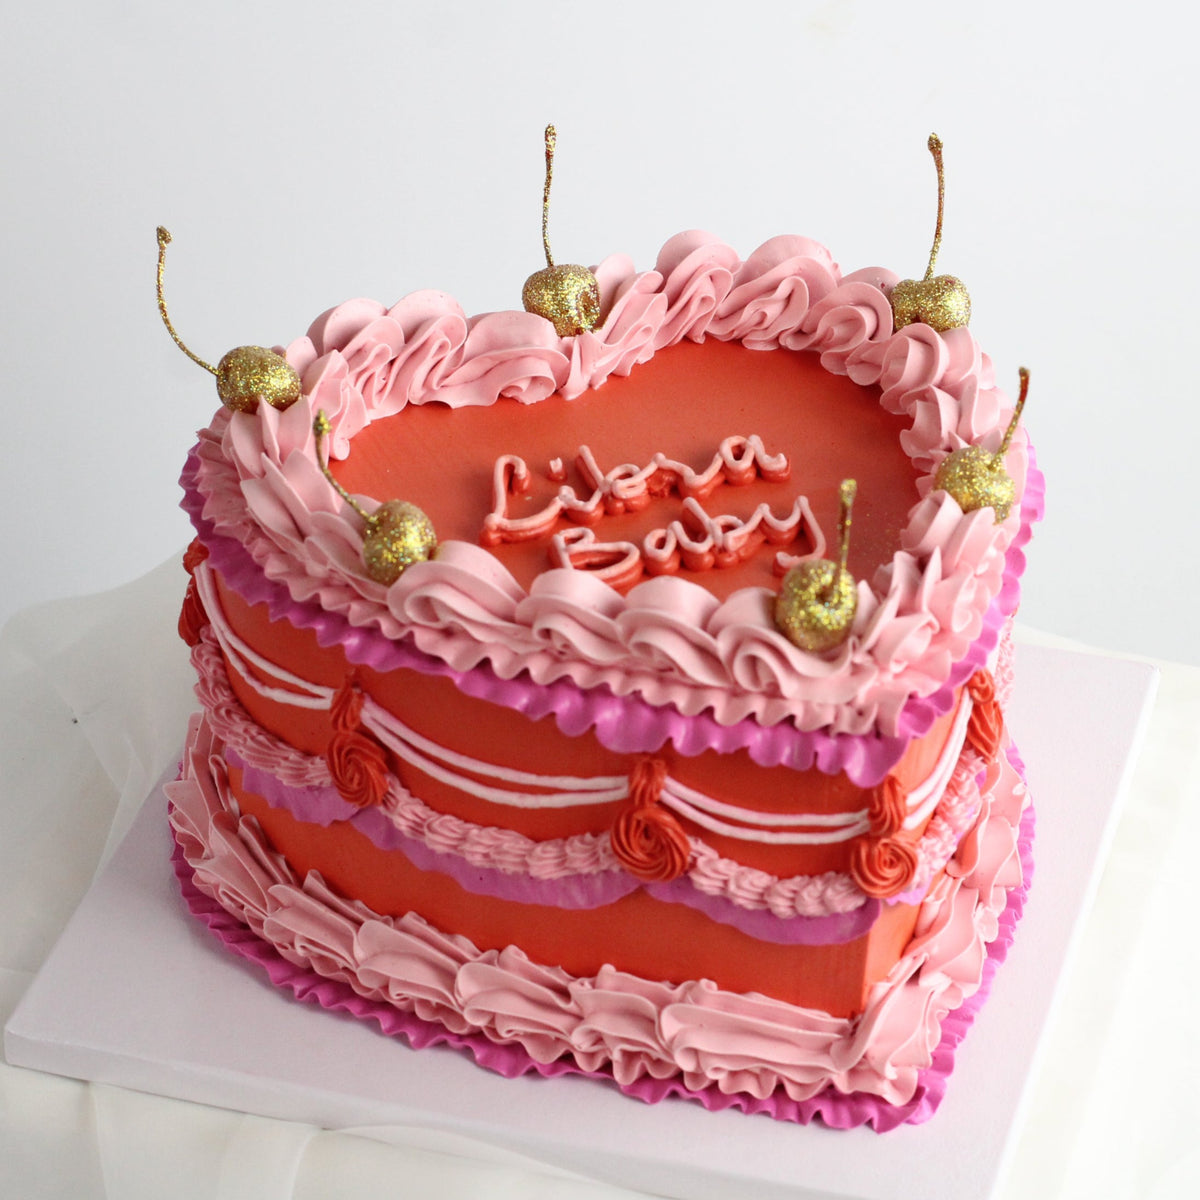 Our heart-shaped cake adorned with colorful frills and golden cherries!